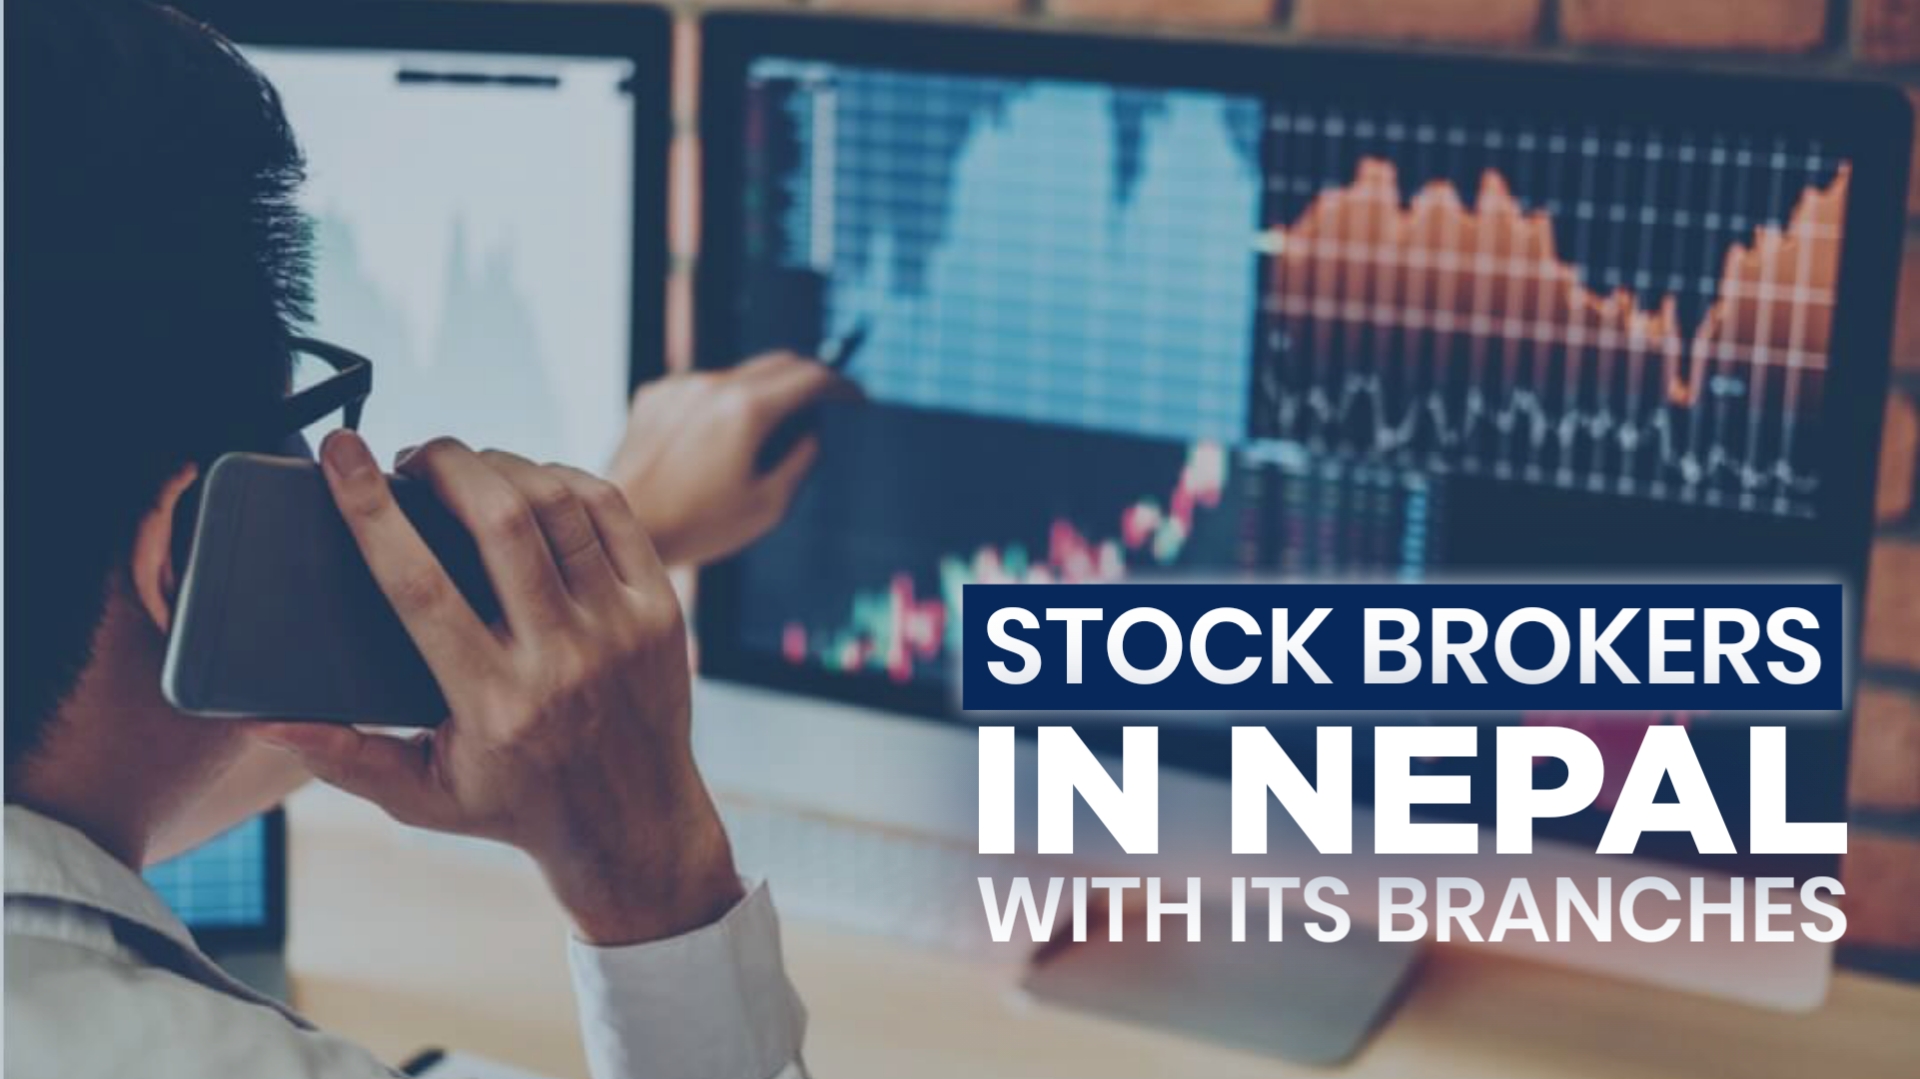 All Stock Brokers in Nepal with its Branches